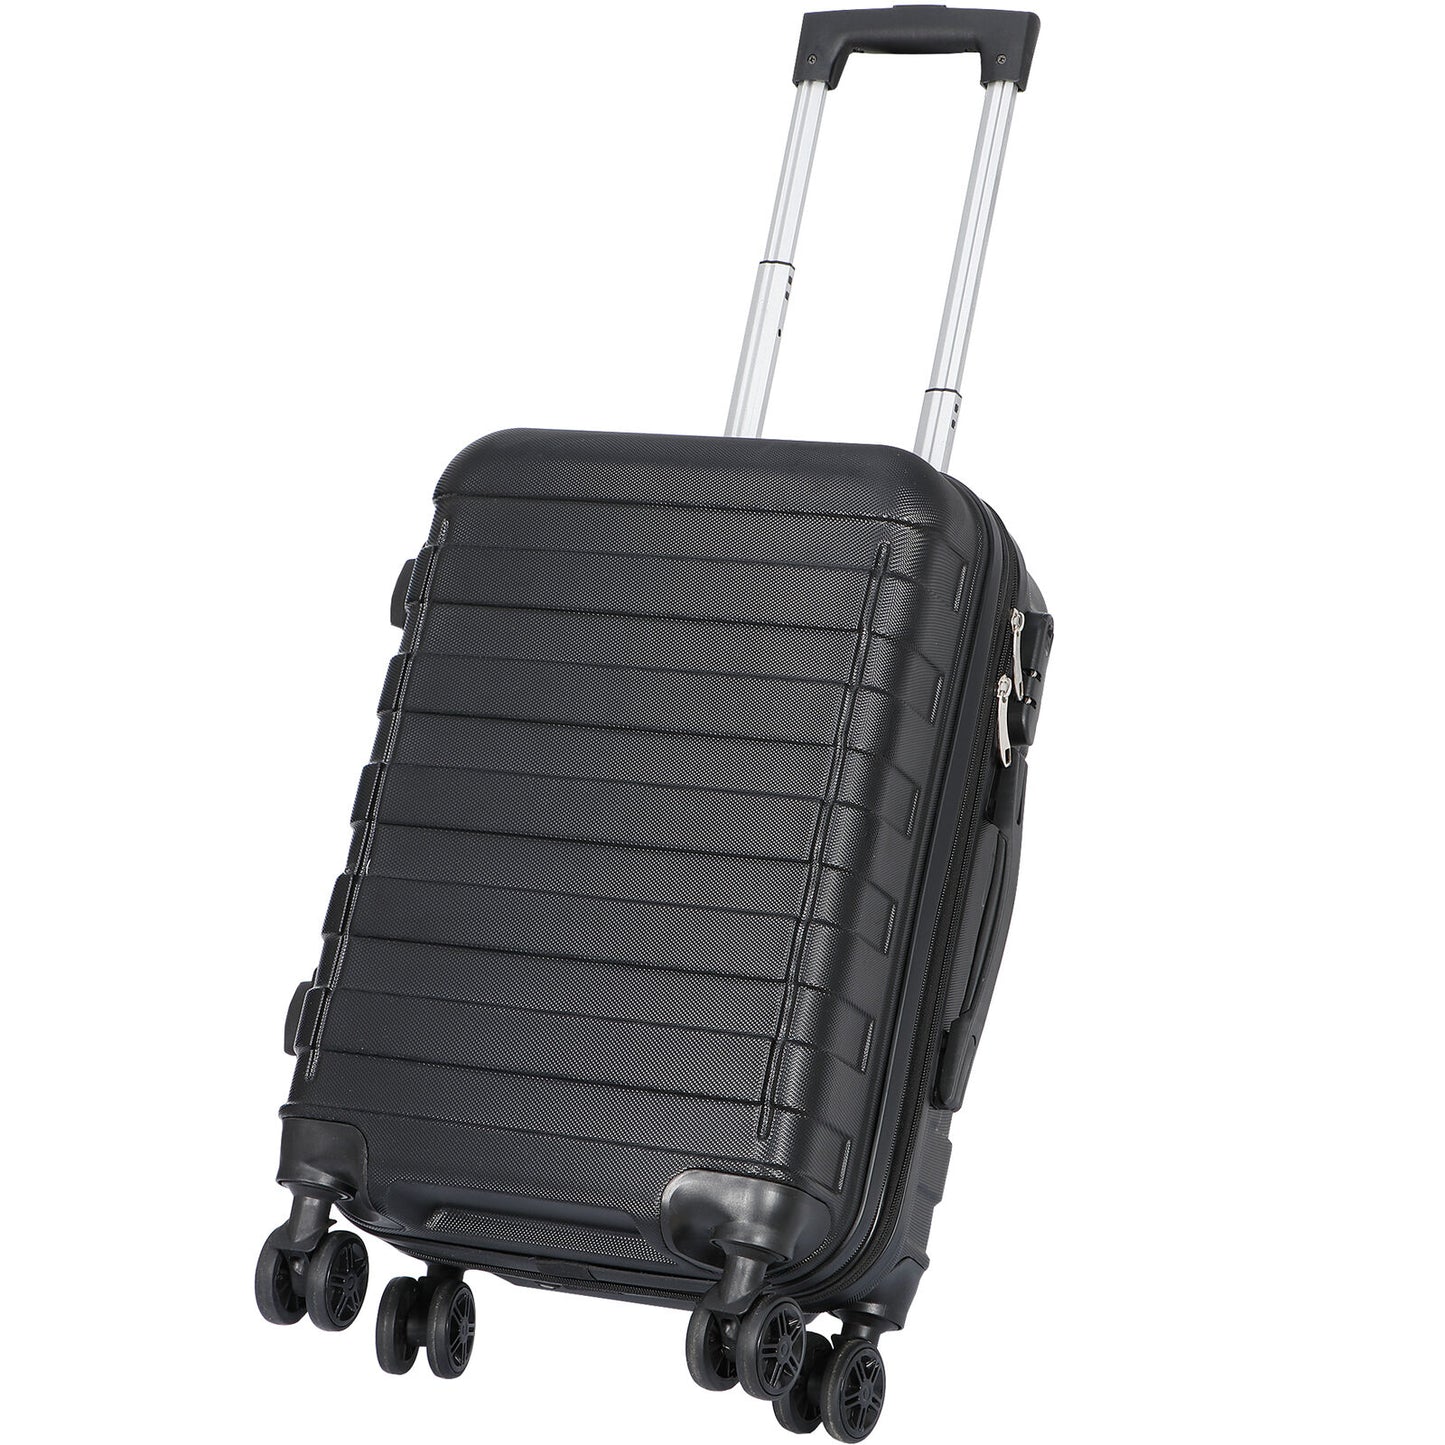 High Quality Carry-On Suitcase Luggage with Spinner Wheels 9.5''x14.5''x22.4"